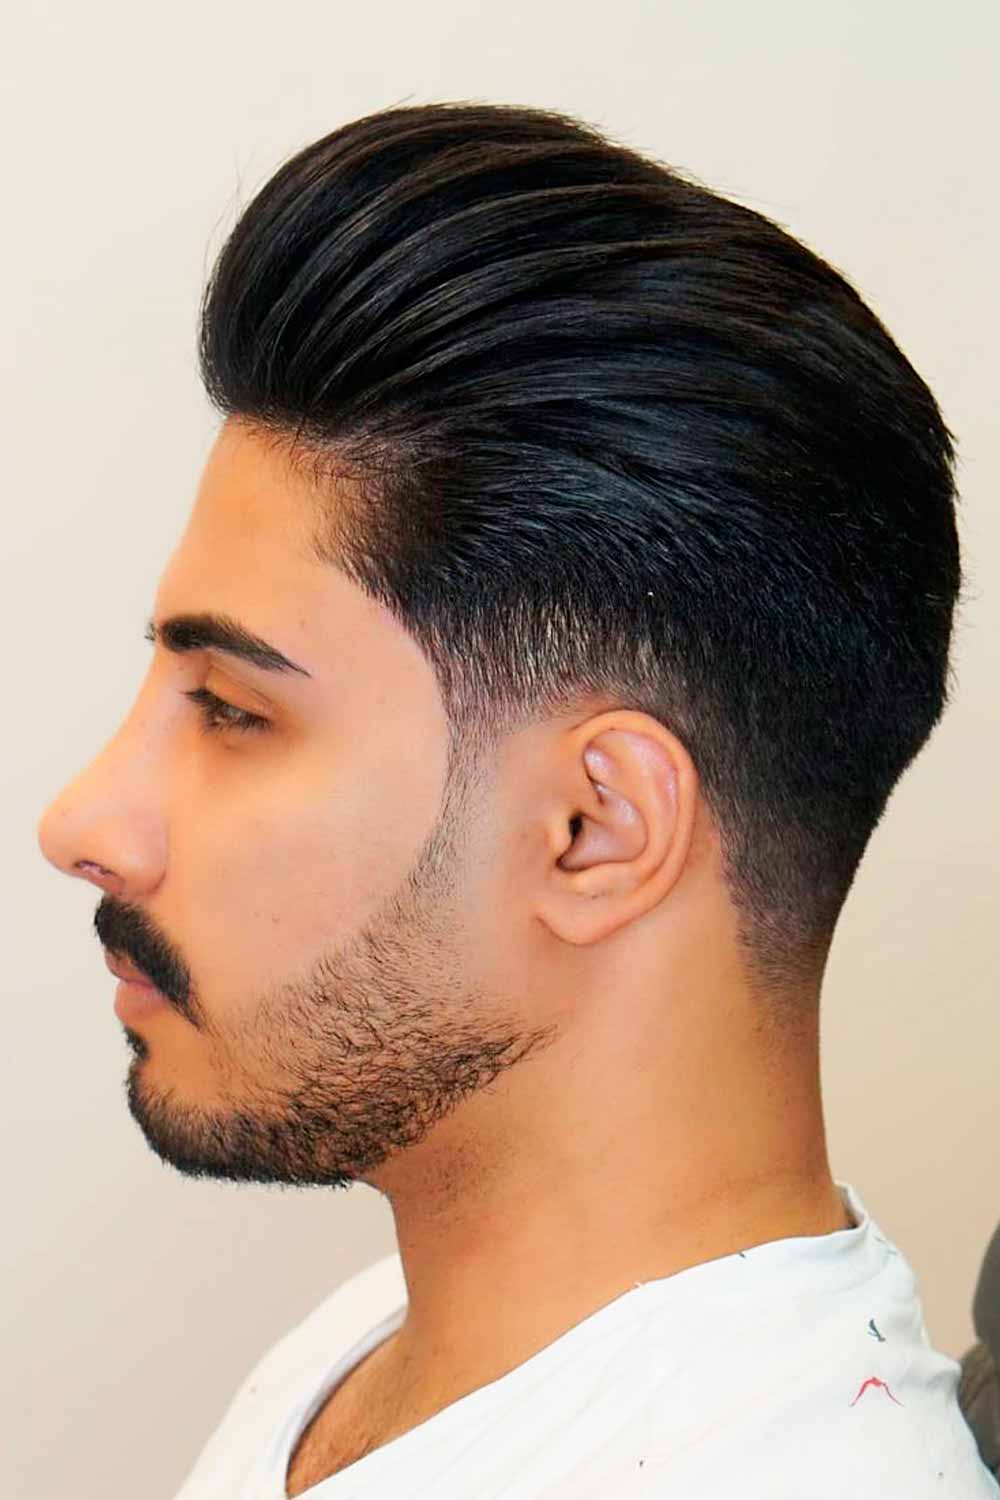 Tapered Sides And Back #taper #taperhaircut #taperedhair #taperedhaircut